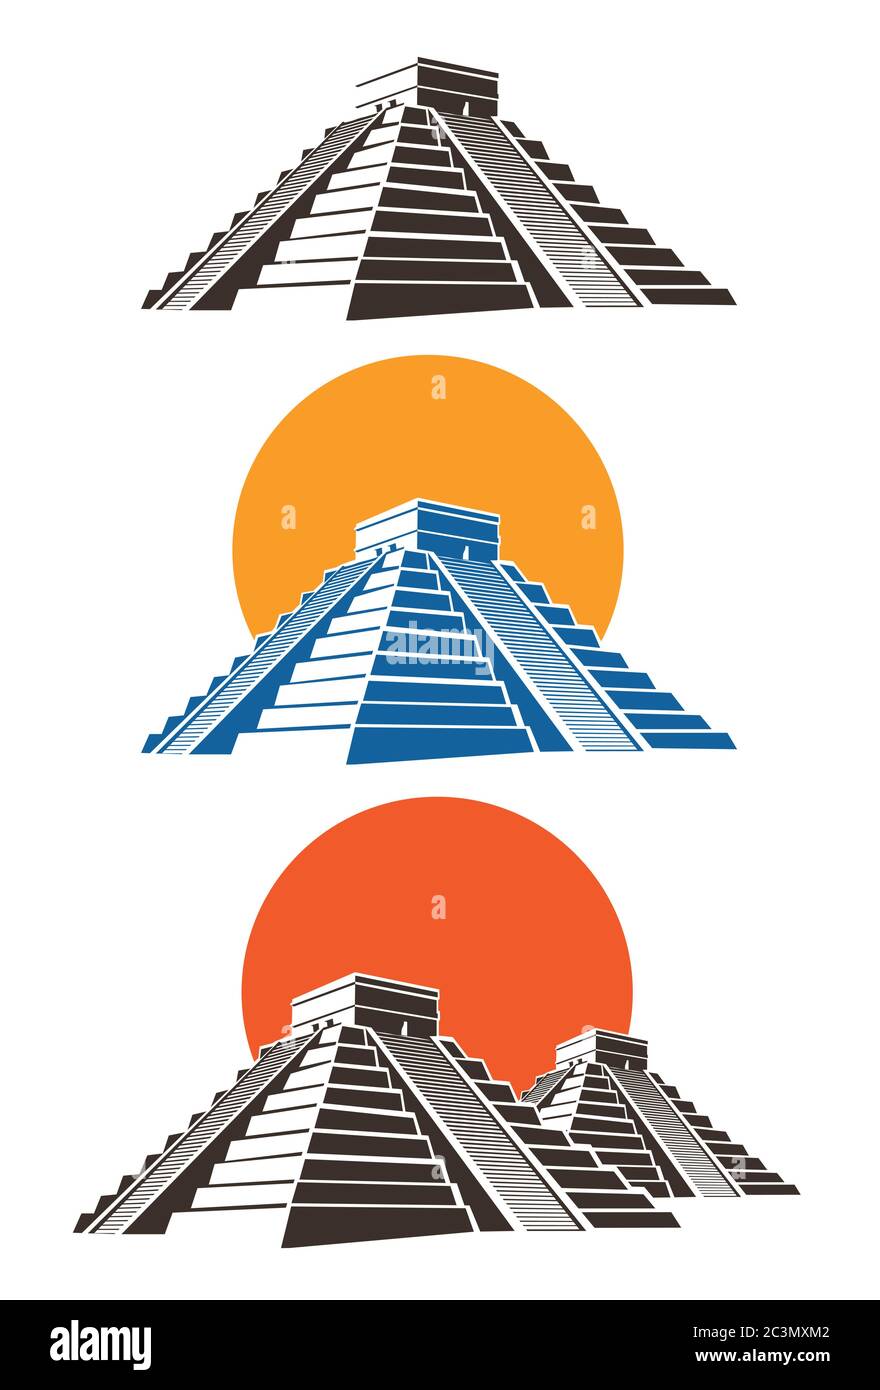 Stylized vector illustration of ancient Mayan pyramids Stock Vector